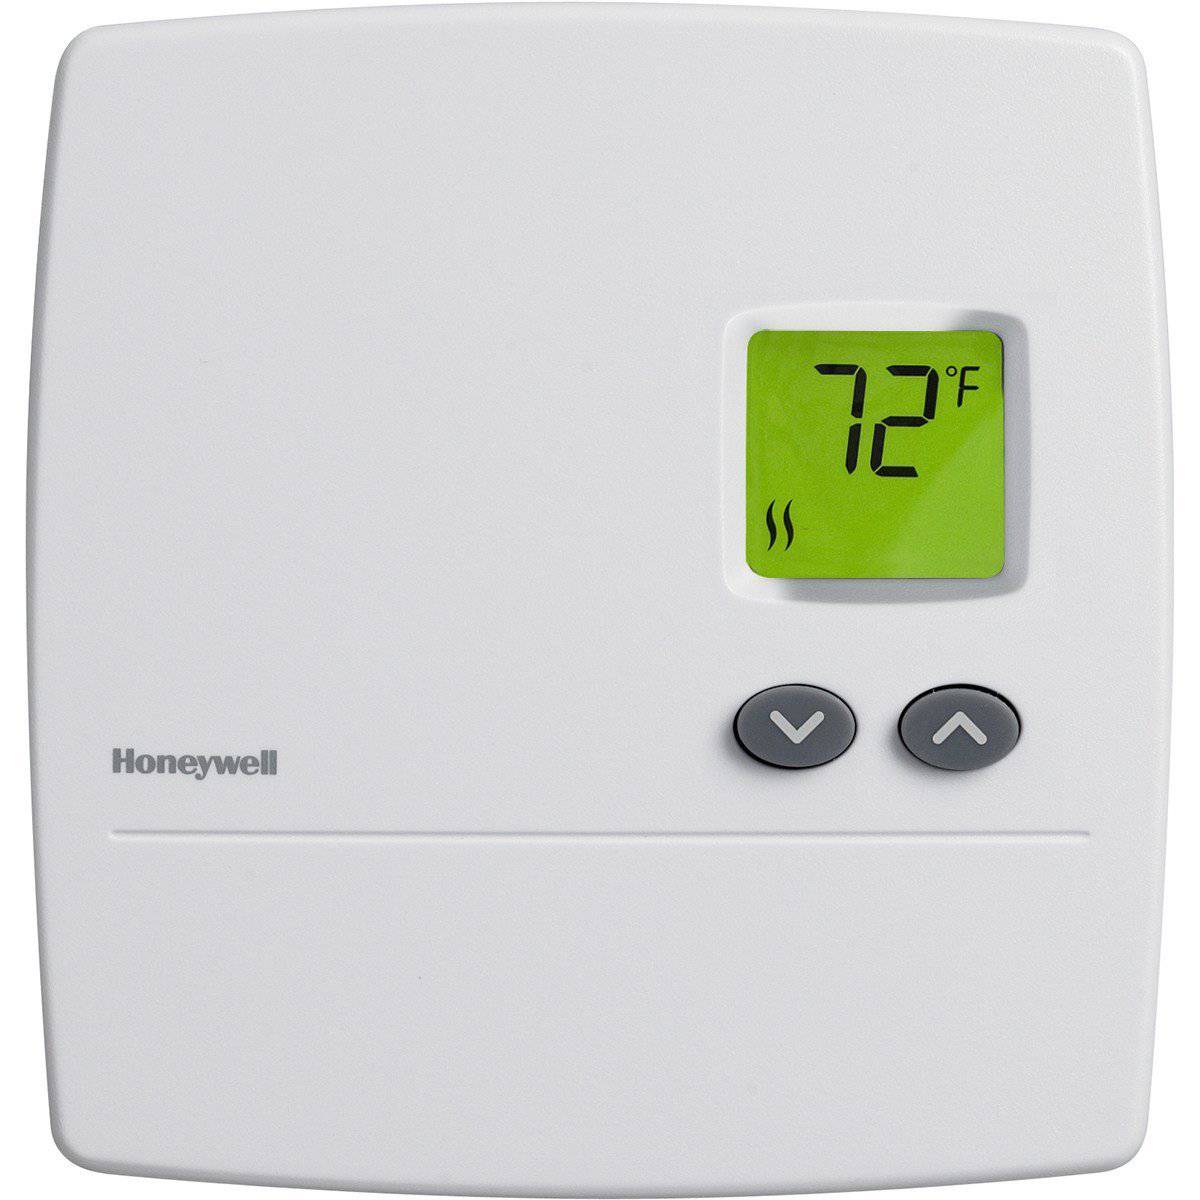 Columbus Electric Programmable Thermostat Manual